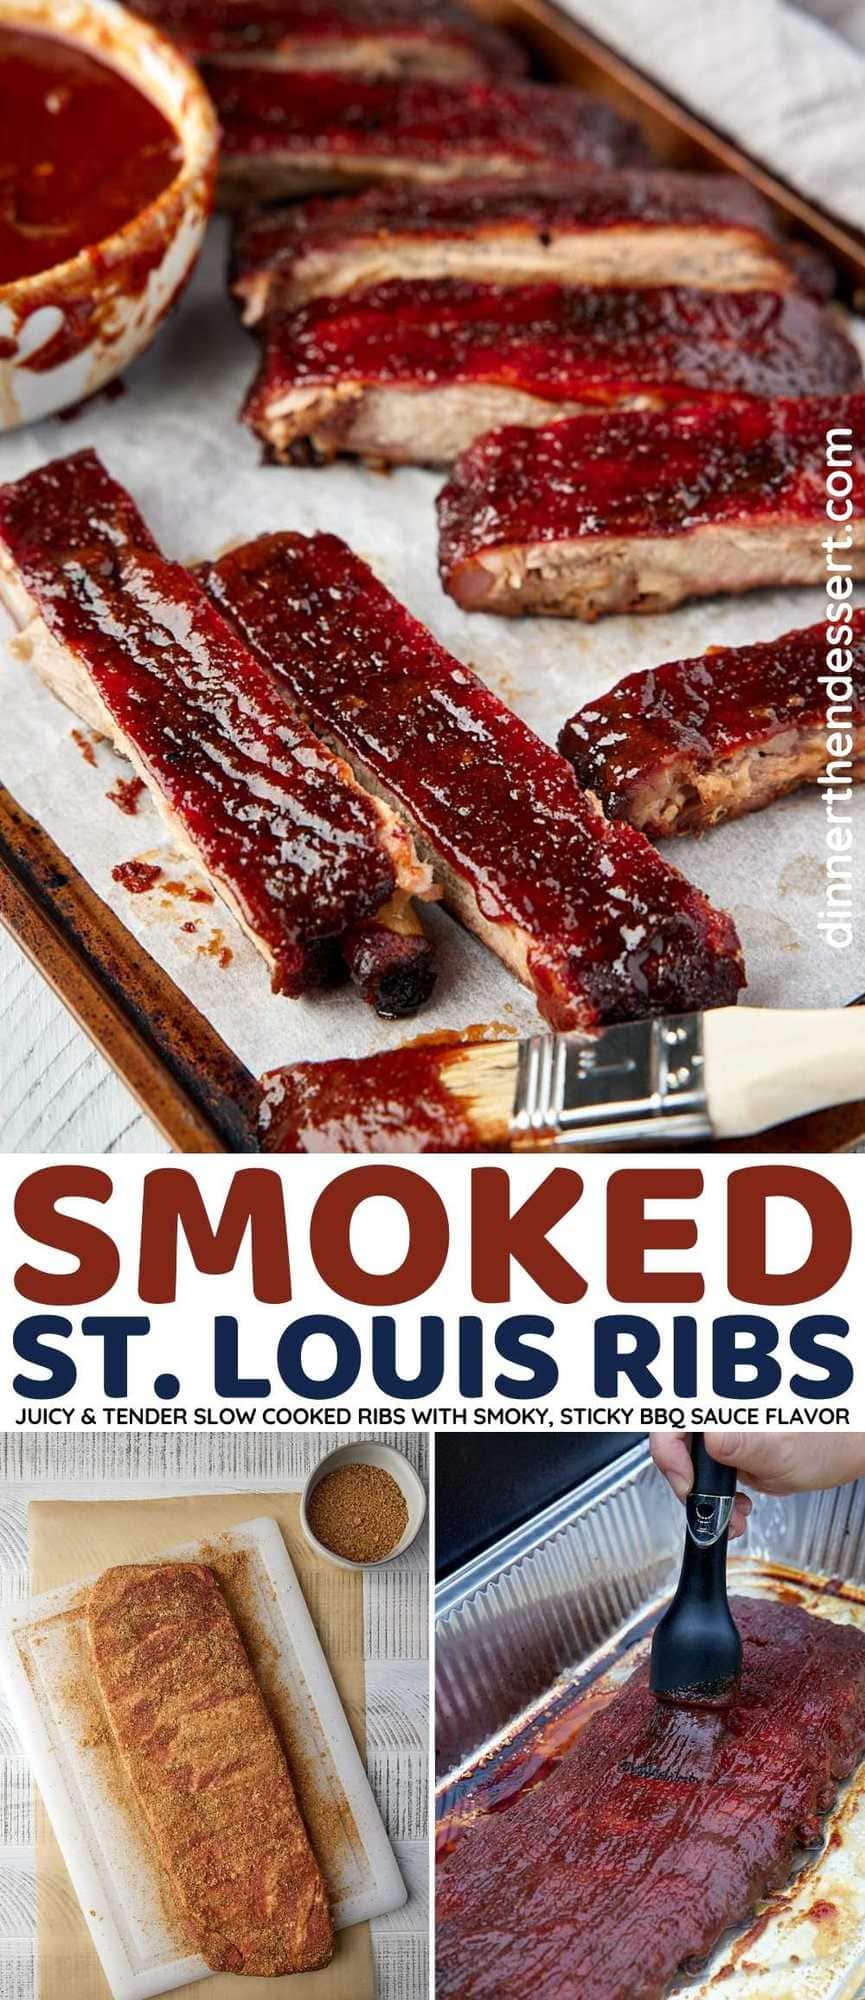 Smoked St. Louis Ribs collage